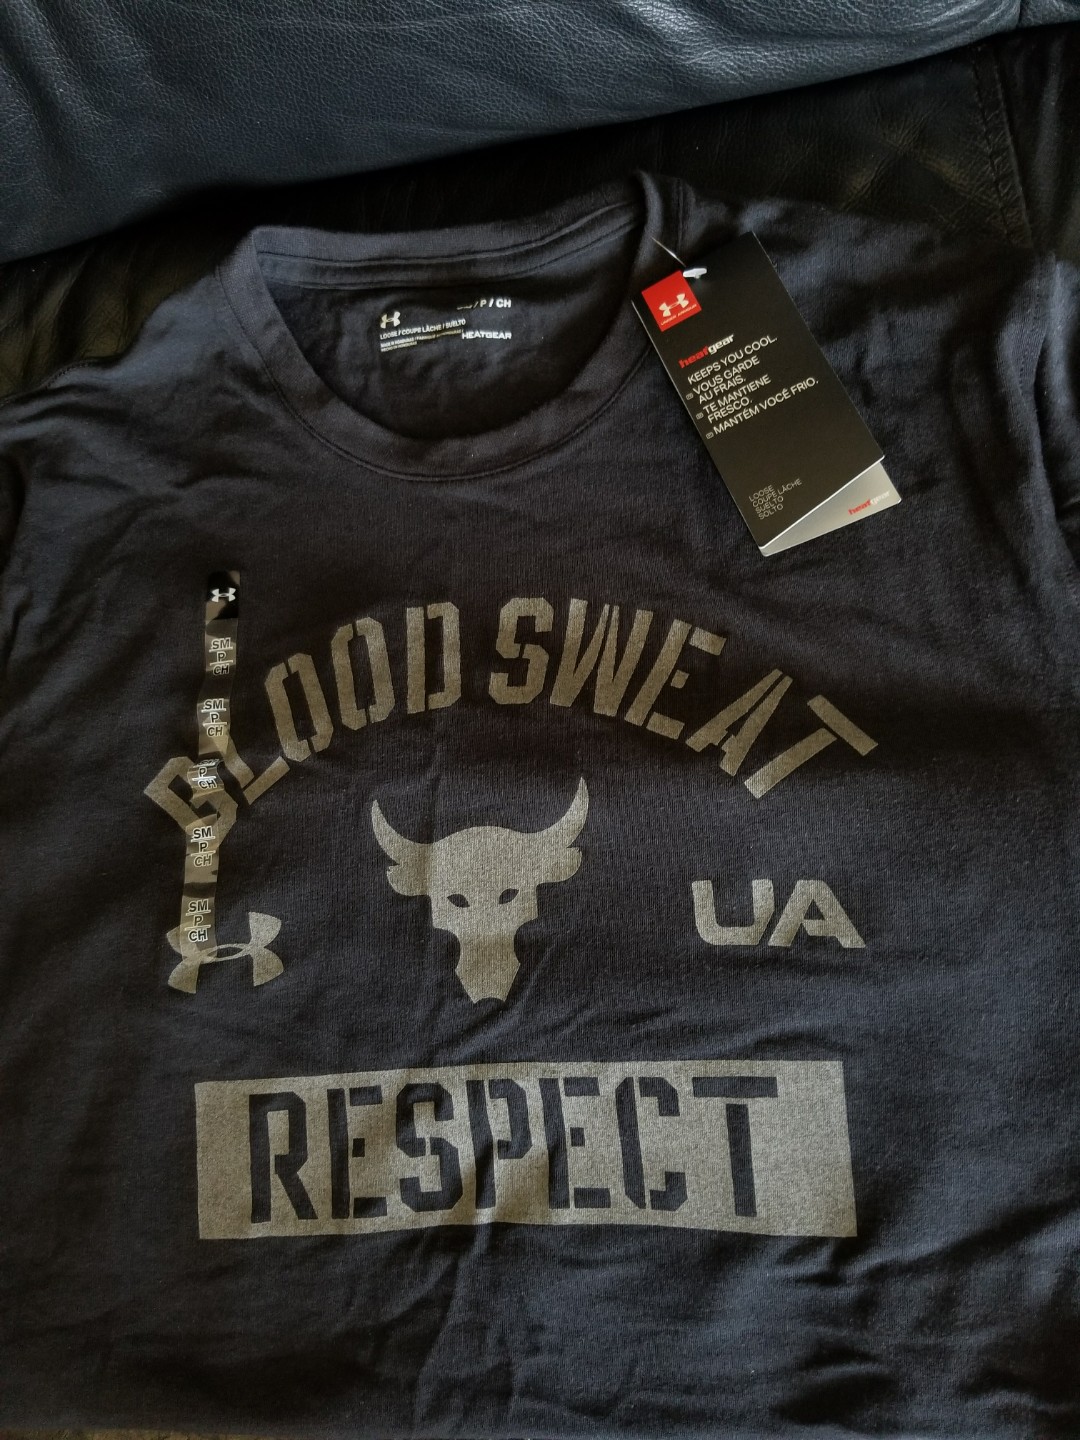 Reductor By law Maladroit Under Armour Project Rock T shirt (Blood, Sweat, Respect), 男裝, 外套及戶外衣服-  Carousell